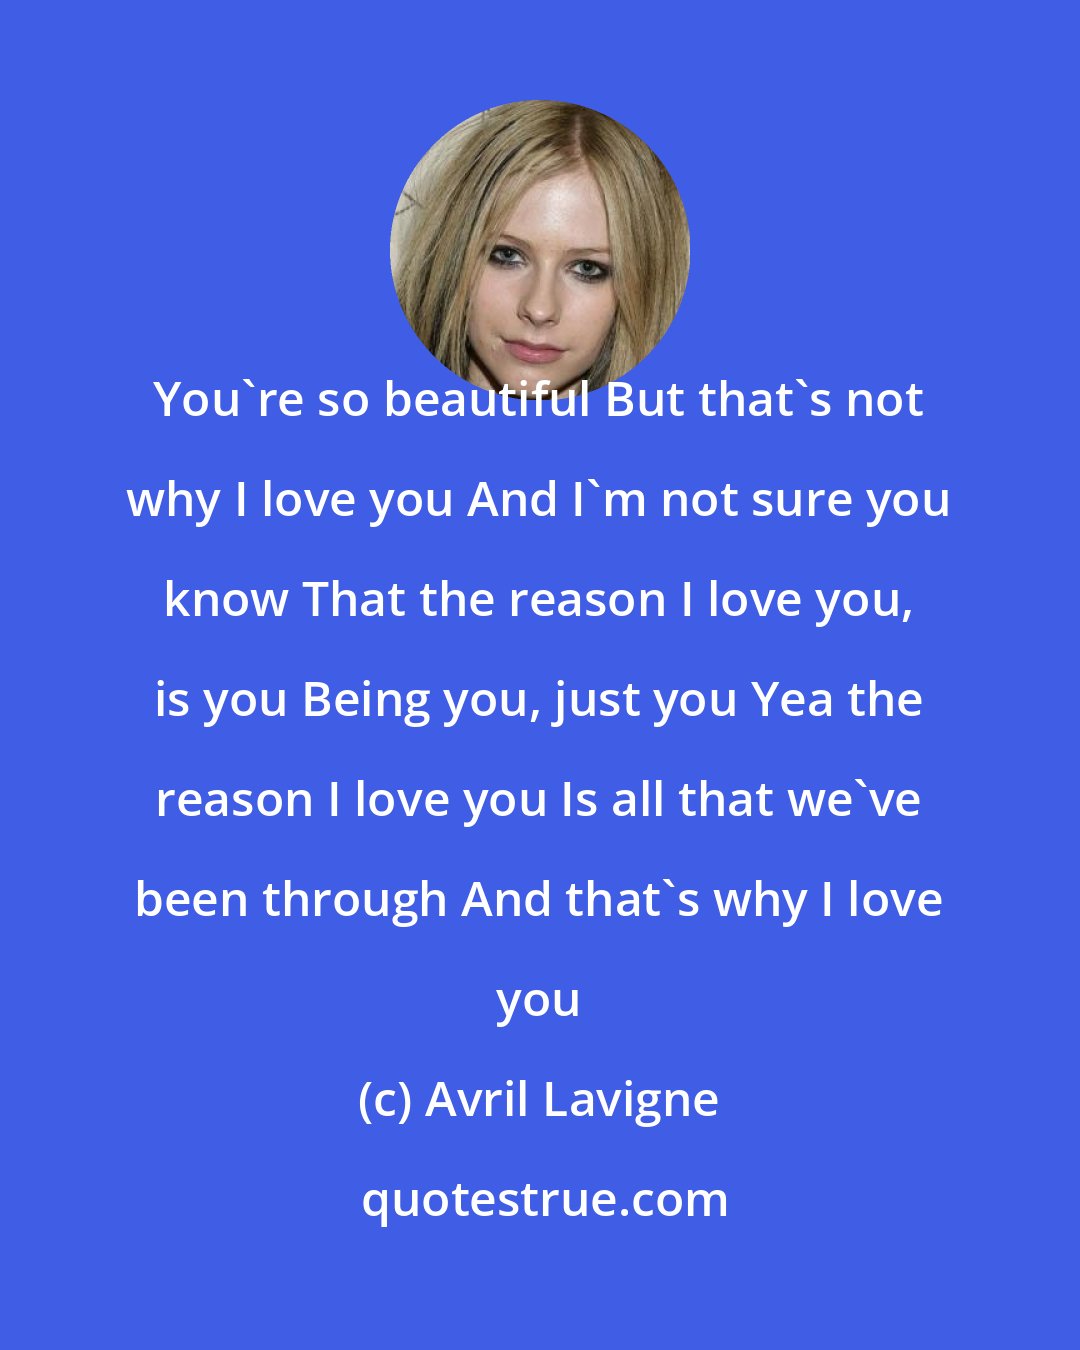 Avril Lavigne: You're so beautiful But that's not why I love you And I'm not sure you know That the reason I love you, is you Being you, just you Yea the reason I love you Is all that we've been through And that's why I love you